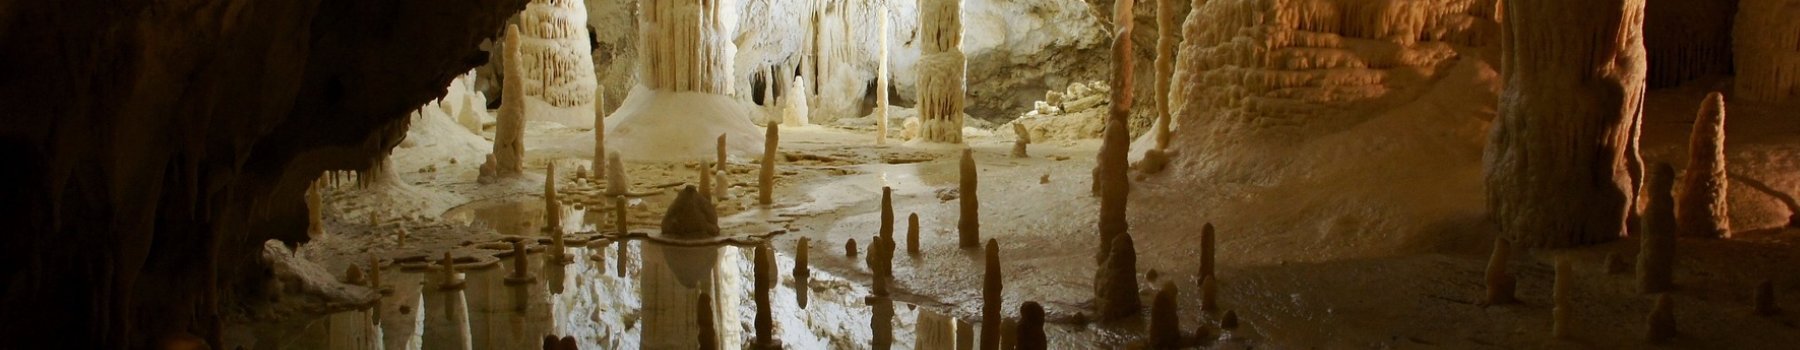 Excursion to the Frasassi Caves by bus from Rimini